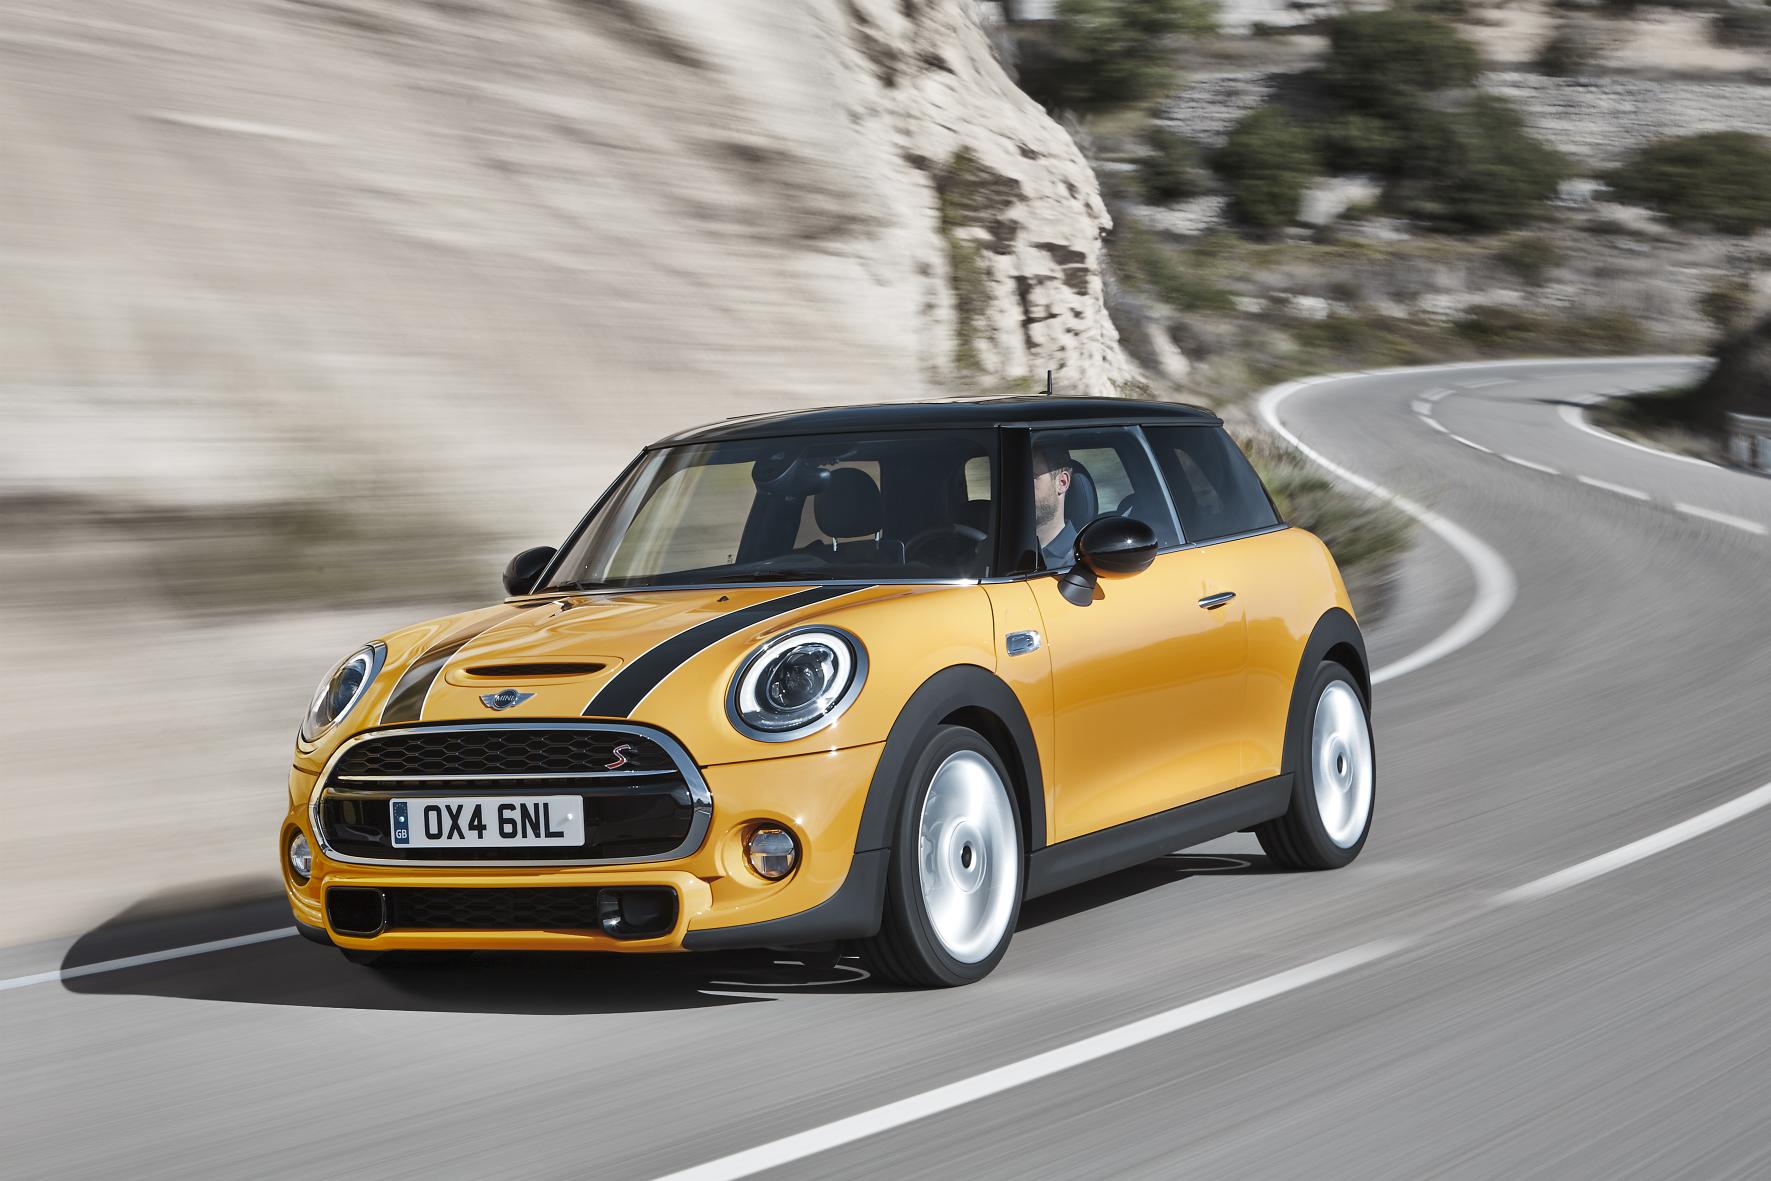 2014 MINI Cooper Priced at GBP15,300 in the UK - autoevolution